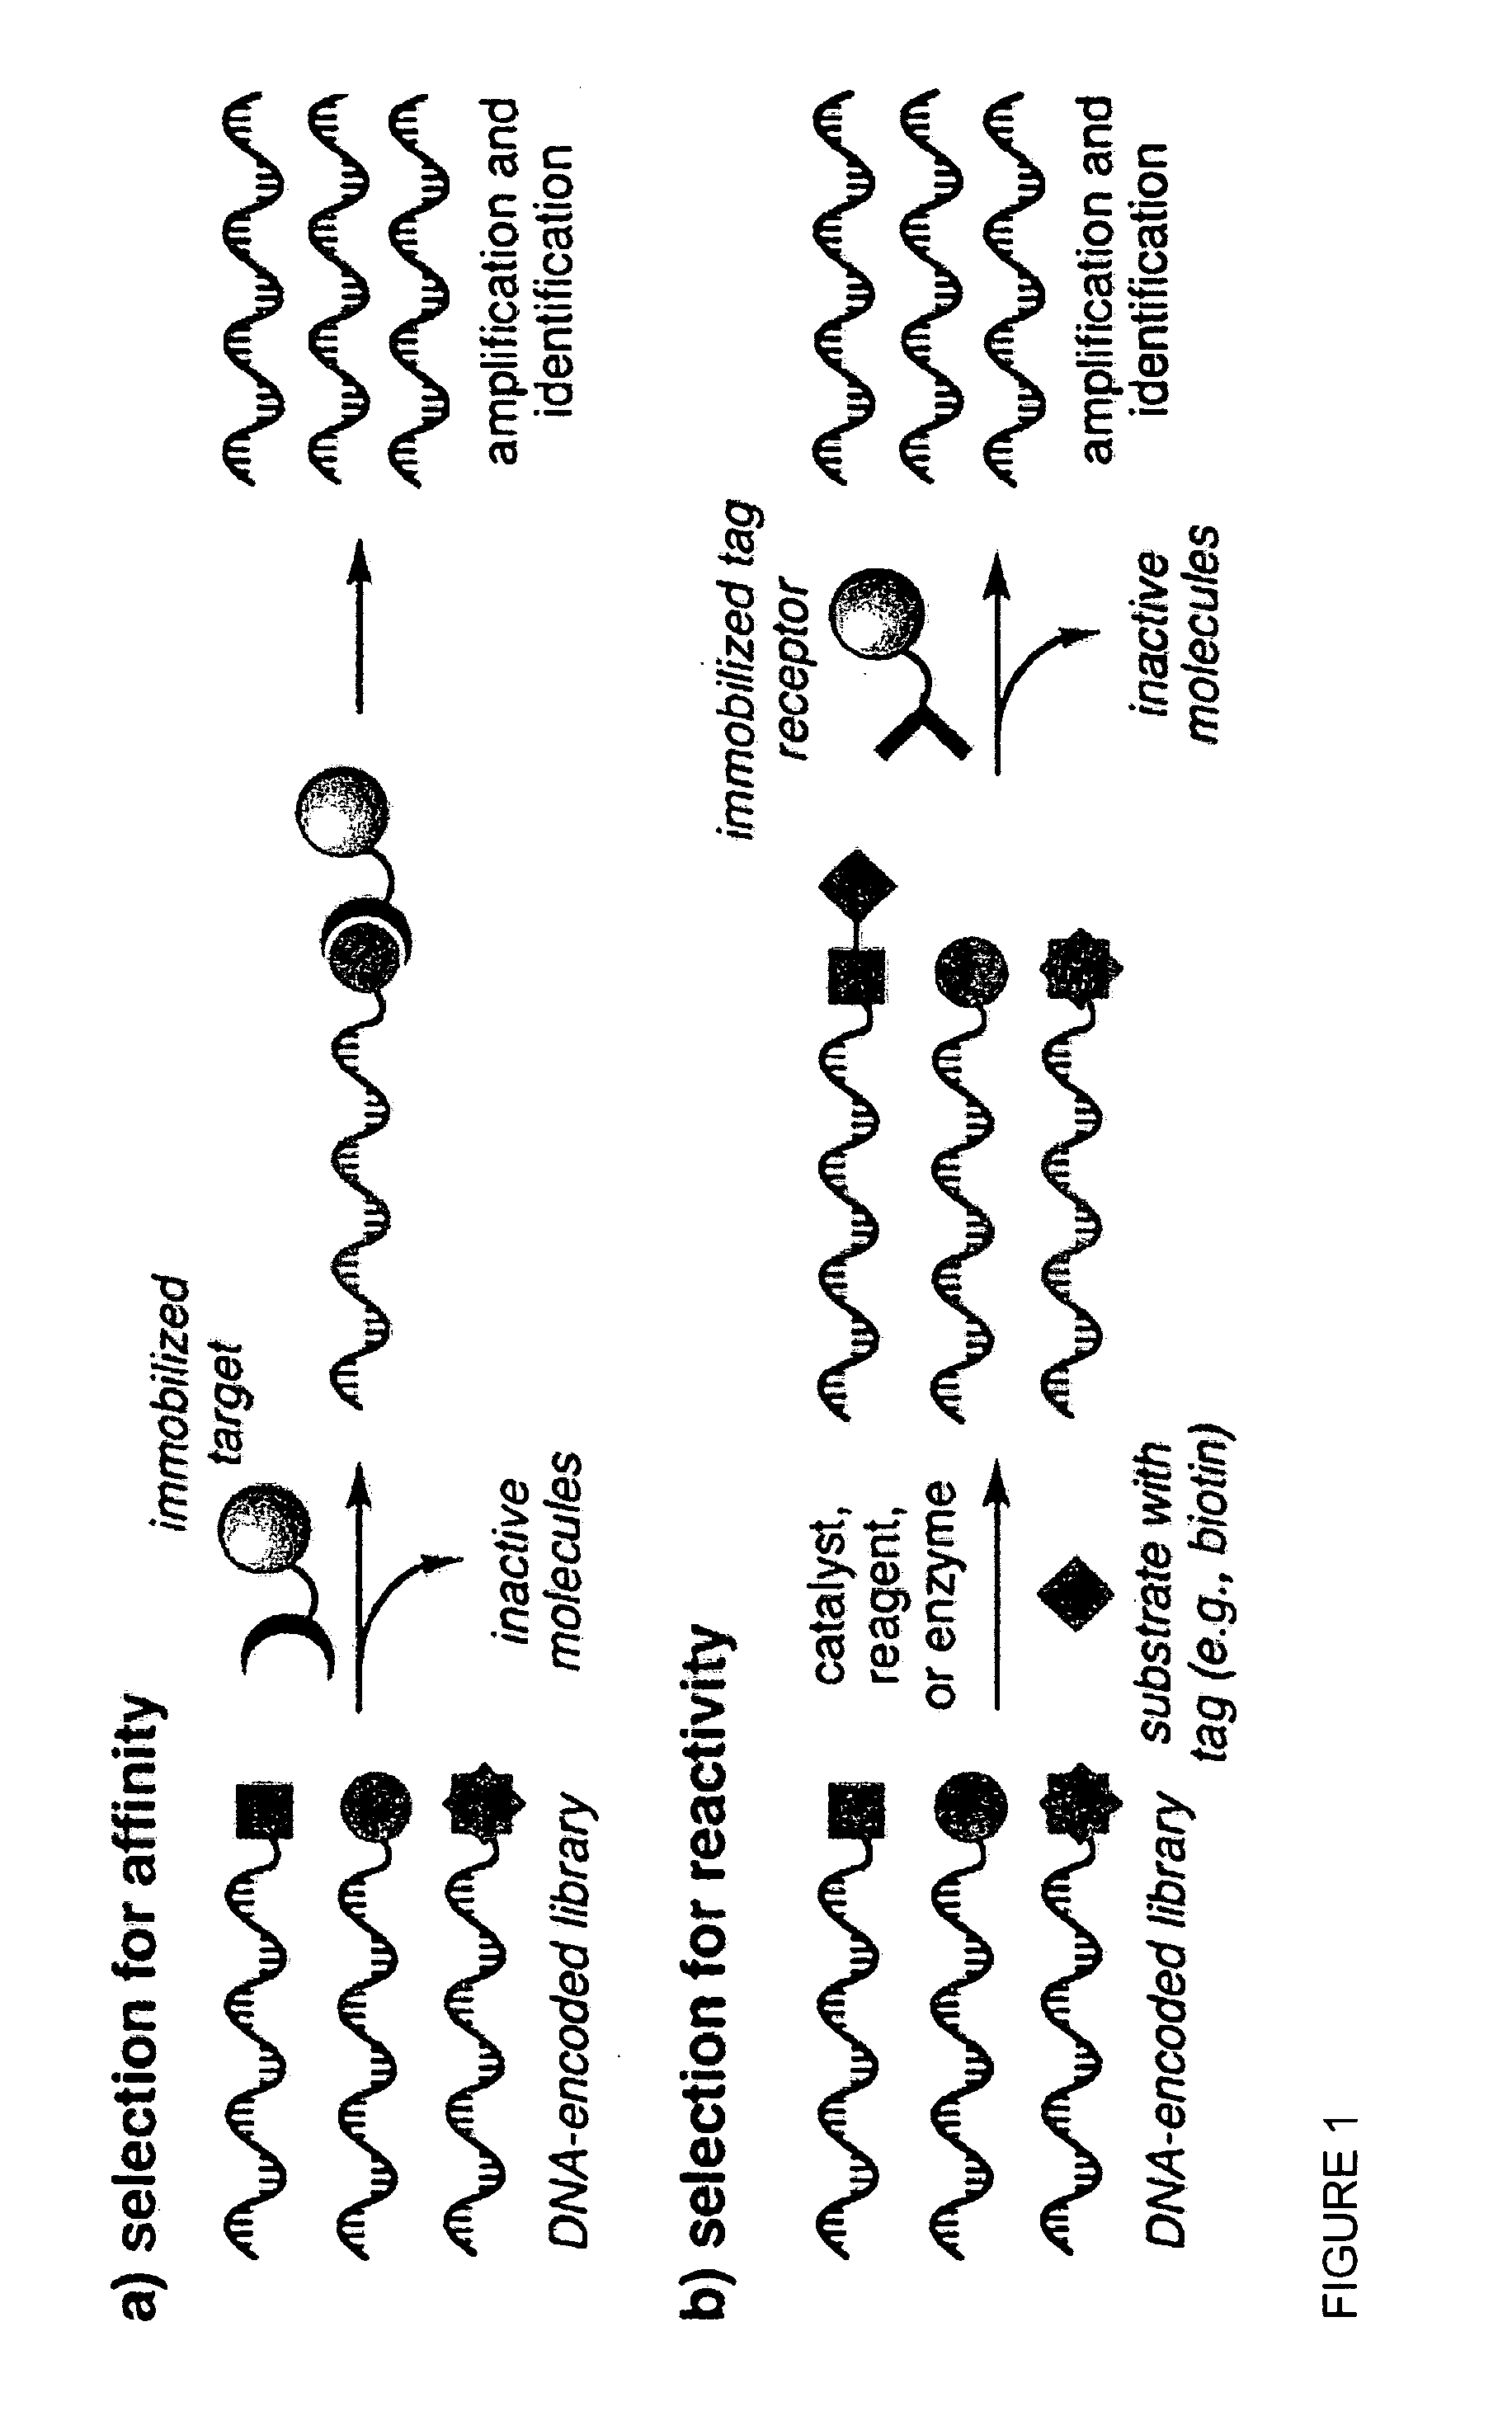 Reactivity-dependent and interaction-dependent PCR